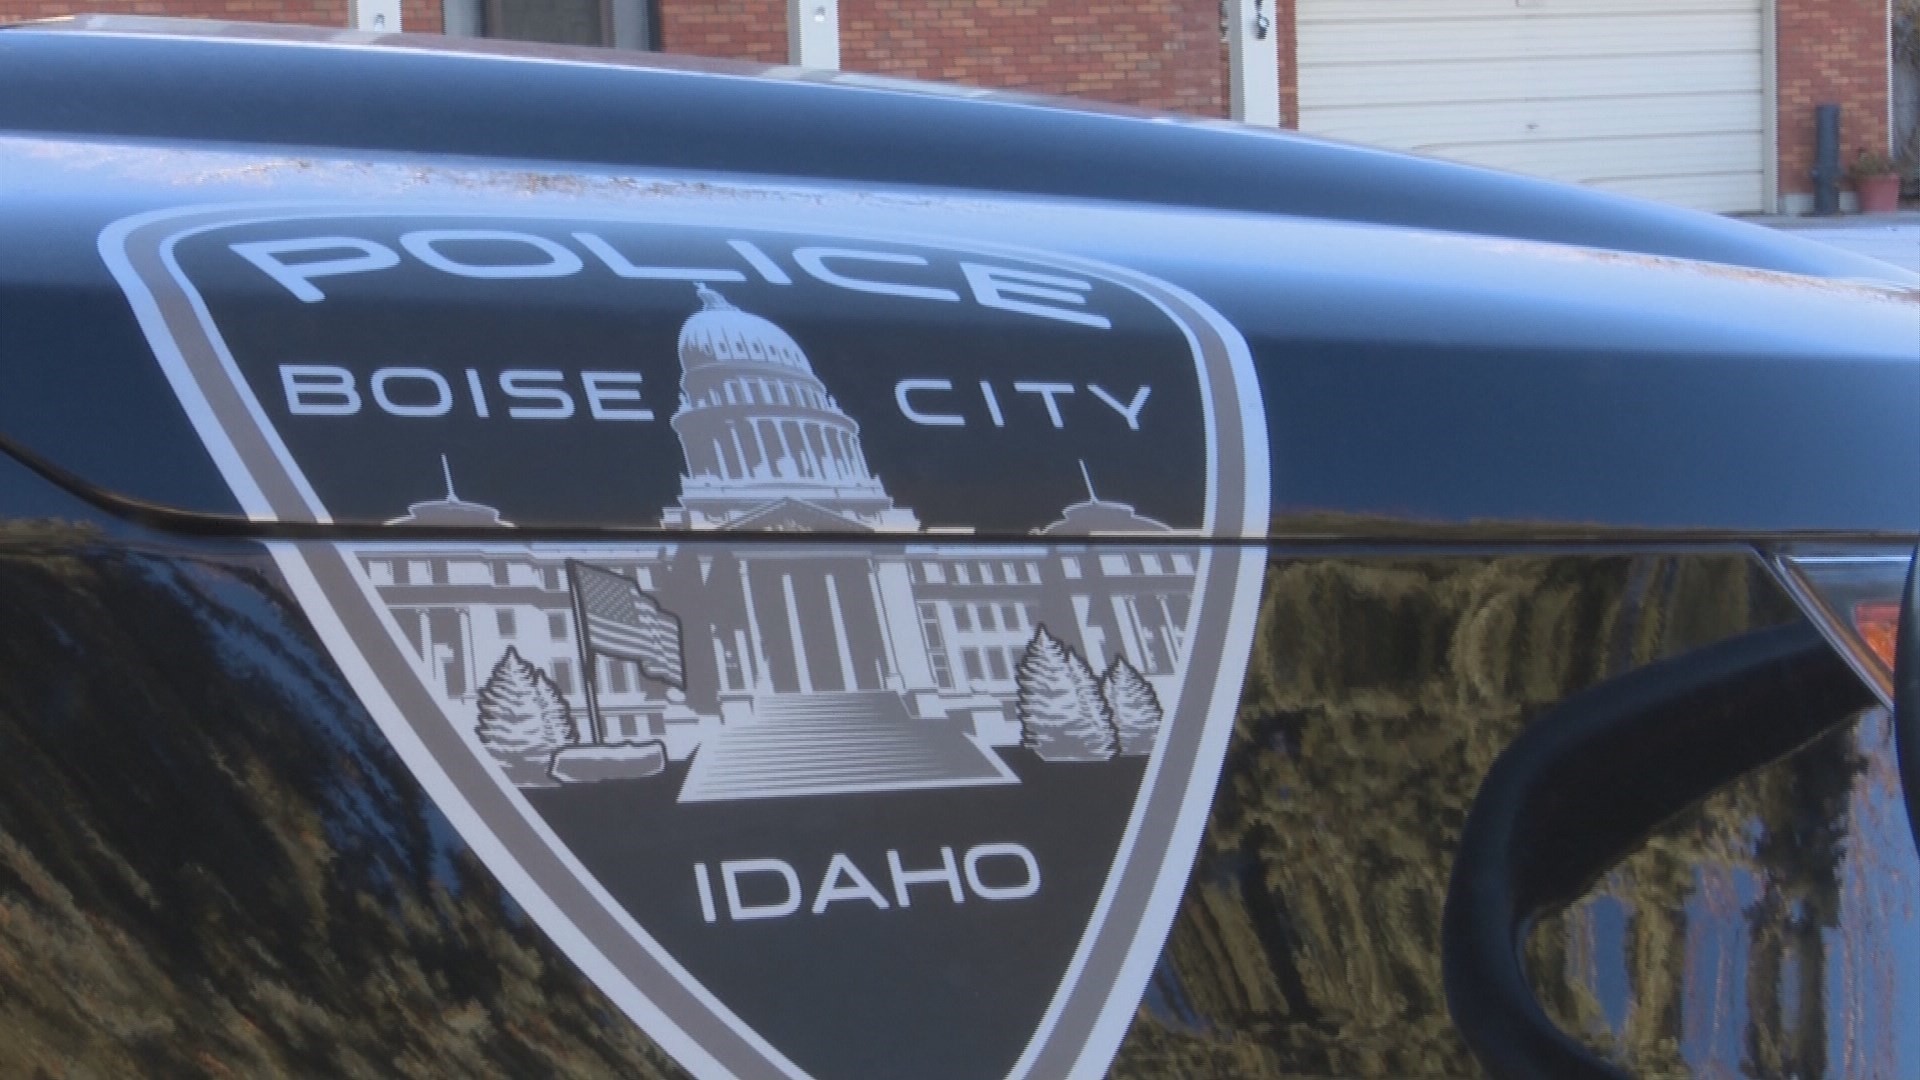 BPD said officers responded to reports of a man waving a firearm around 10:45 p.m. Friday in the area of N. 8th Street and W. Main Street in downtown Boise.